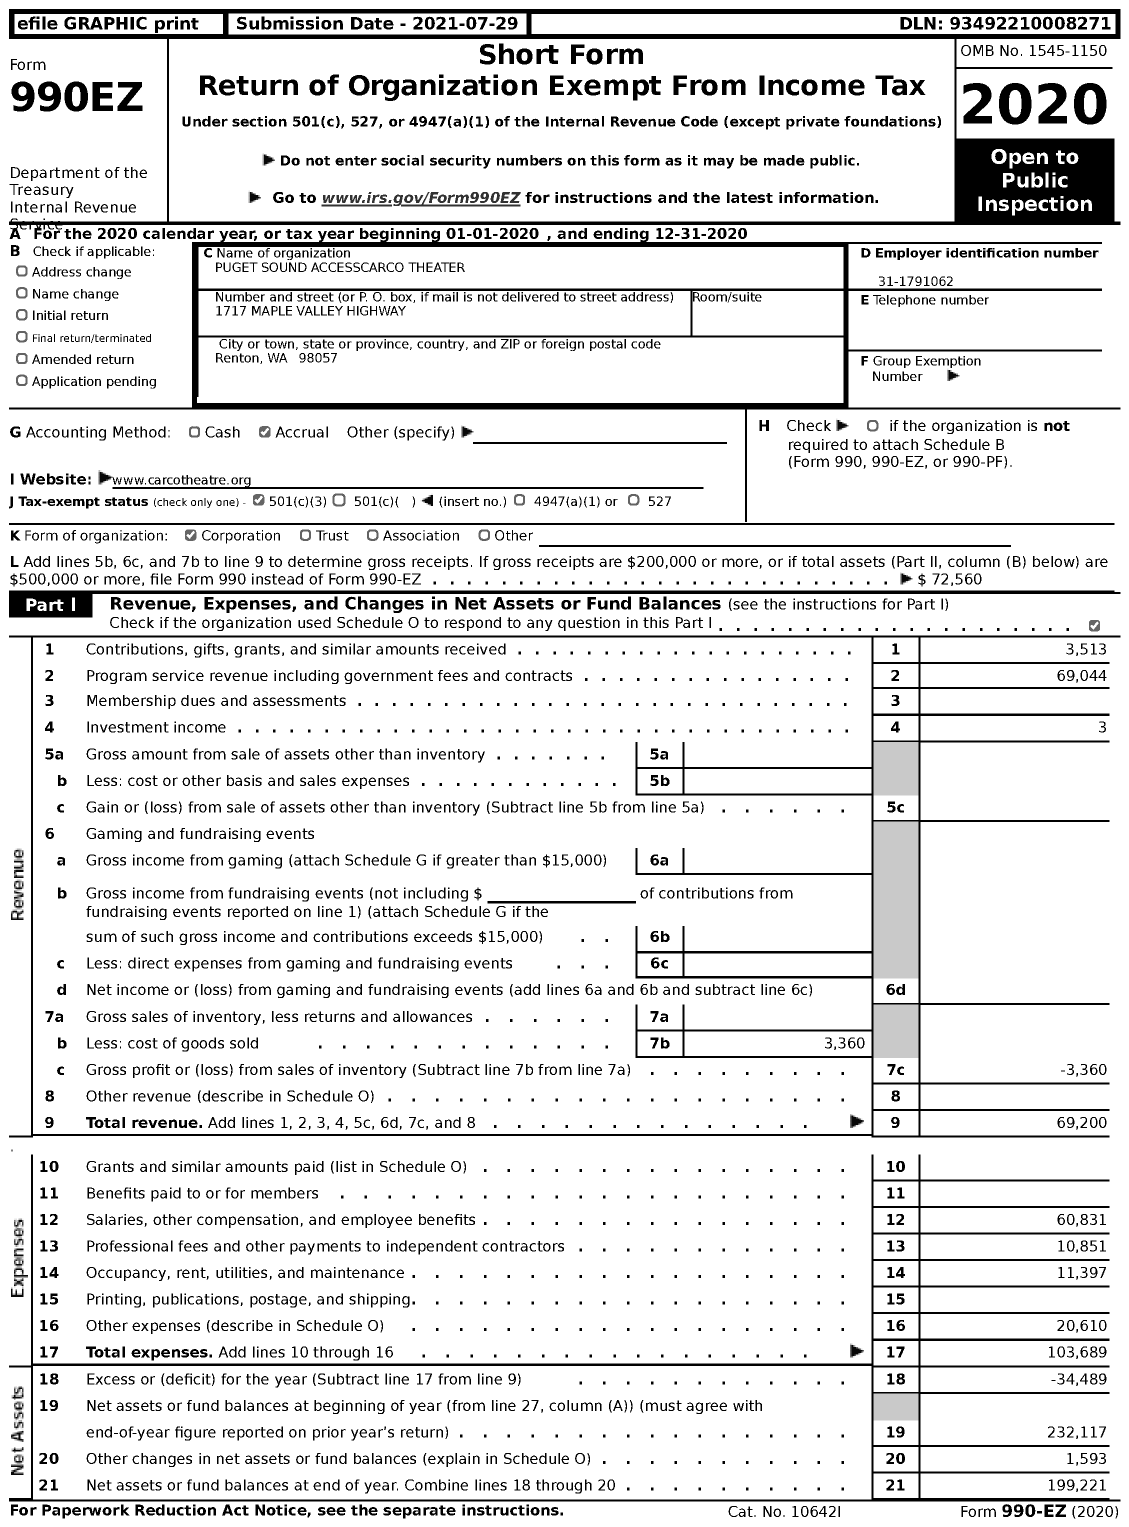 Image of first page of 2020 Form 990EZ for Puget Sound Accesscarco Theater